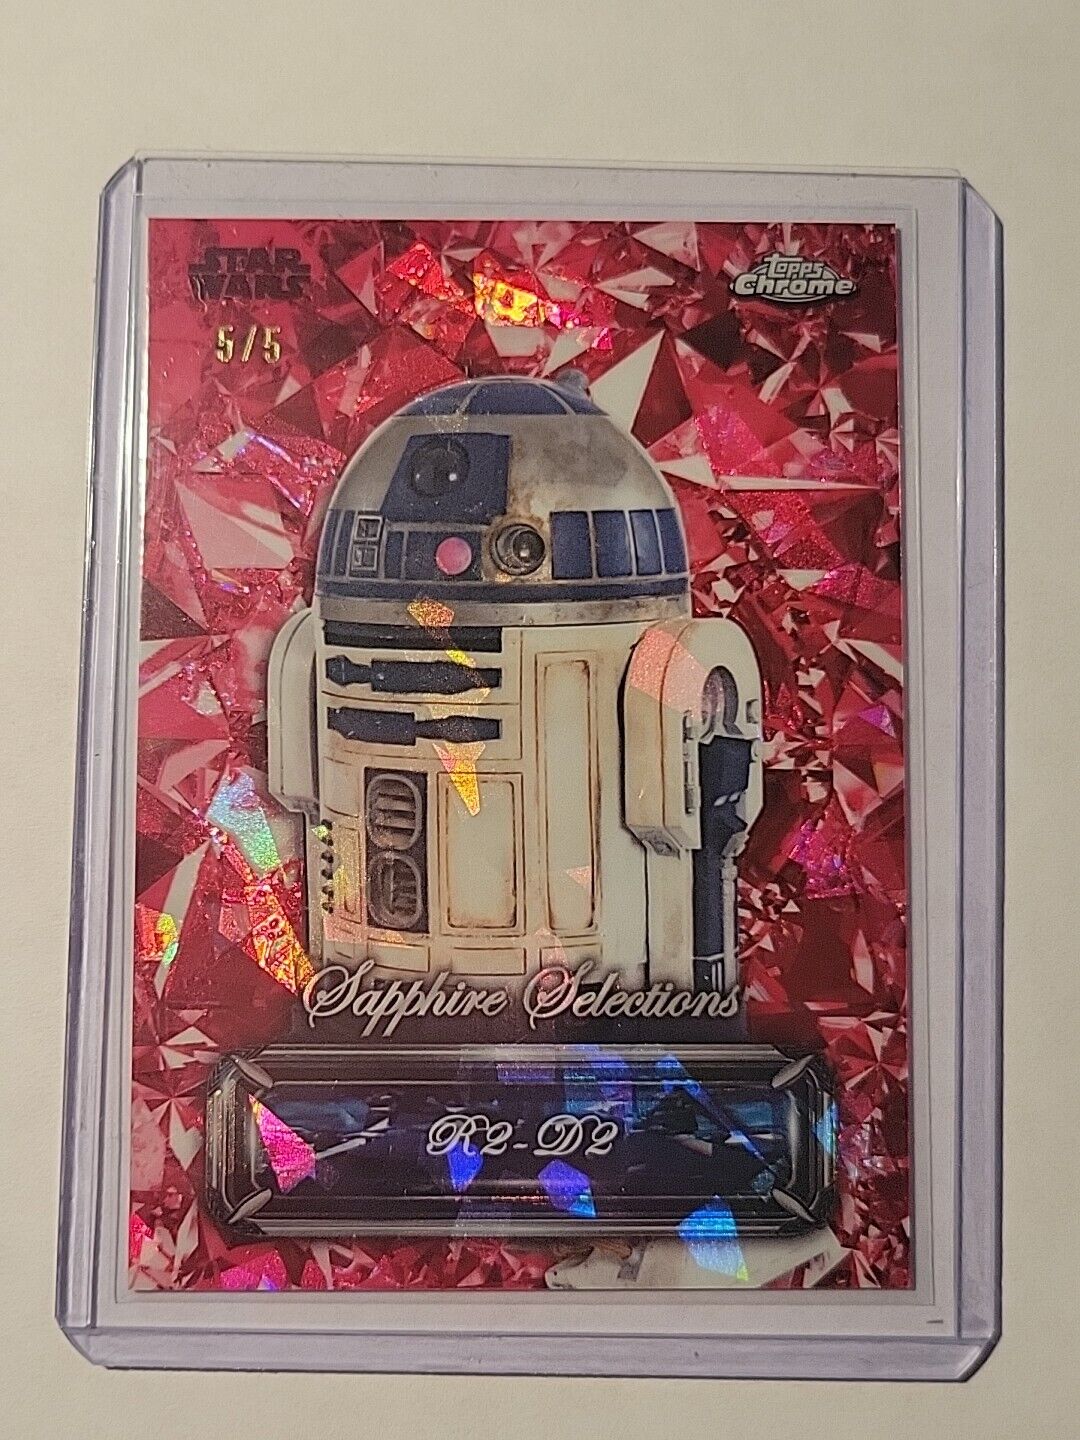 R2-D2 Star Wars Topps Chrome Sapphire Selections 2024, Red Sapphire #/5 SP